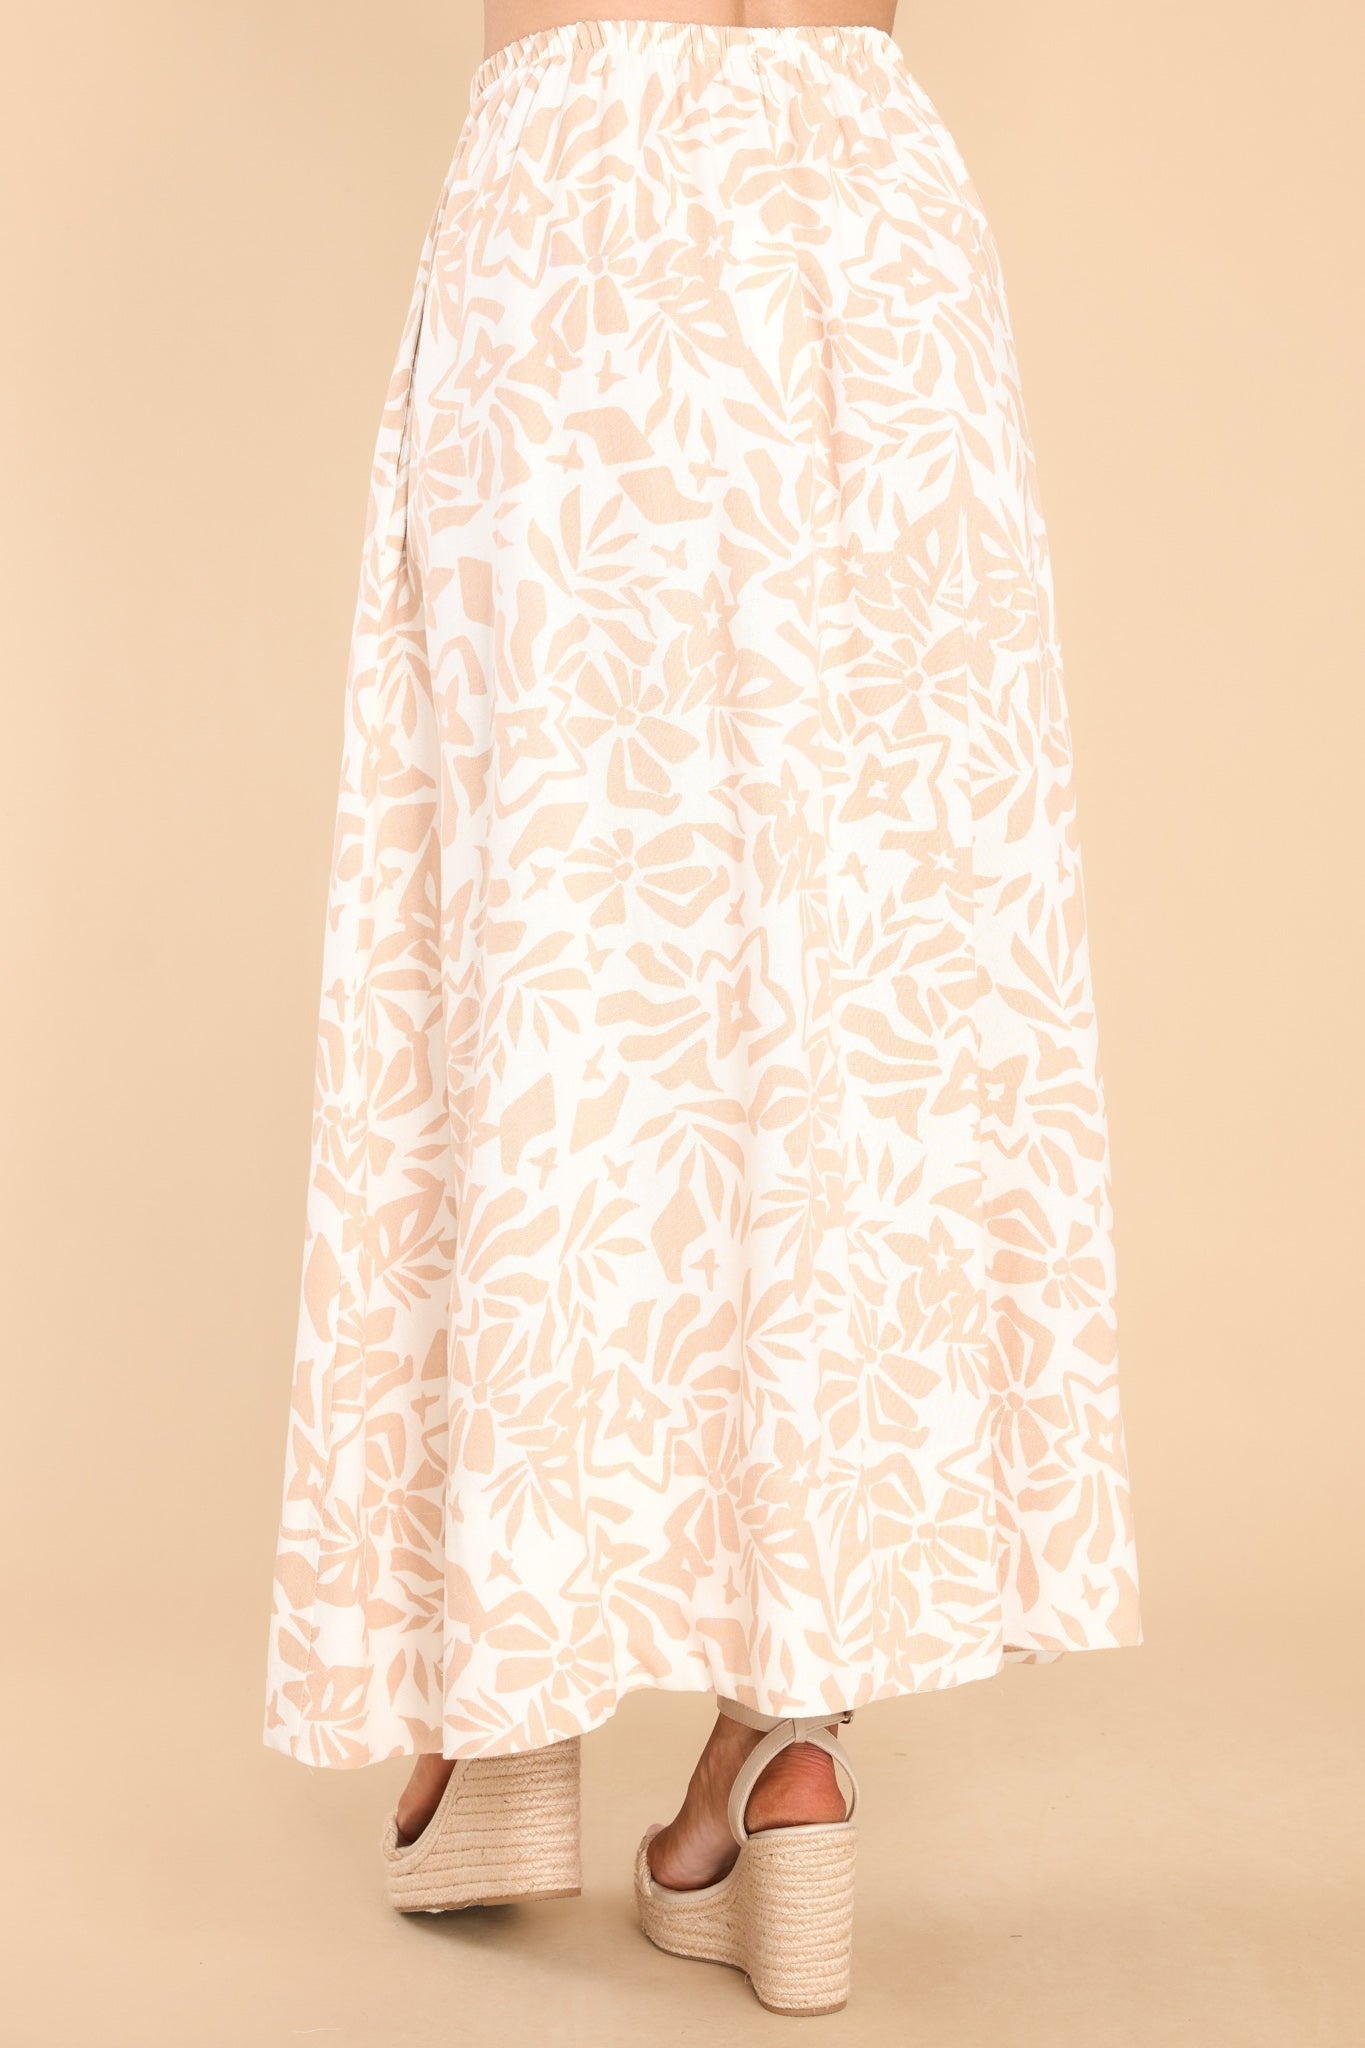 Back view of this skirt that features a high elastic waistband, pockets at the hip, and is flowy throughout.